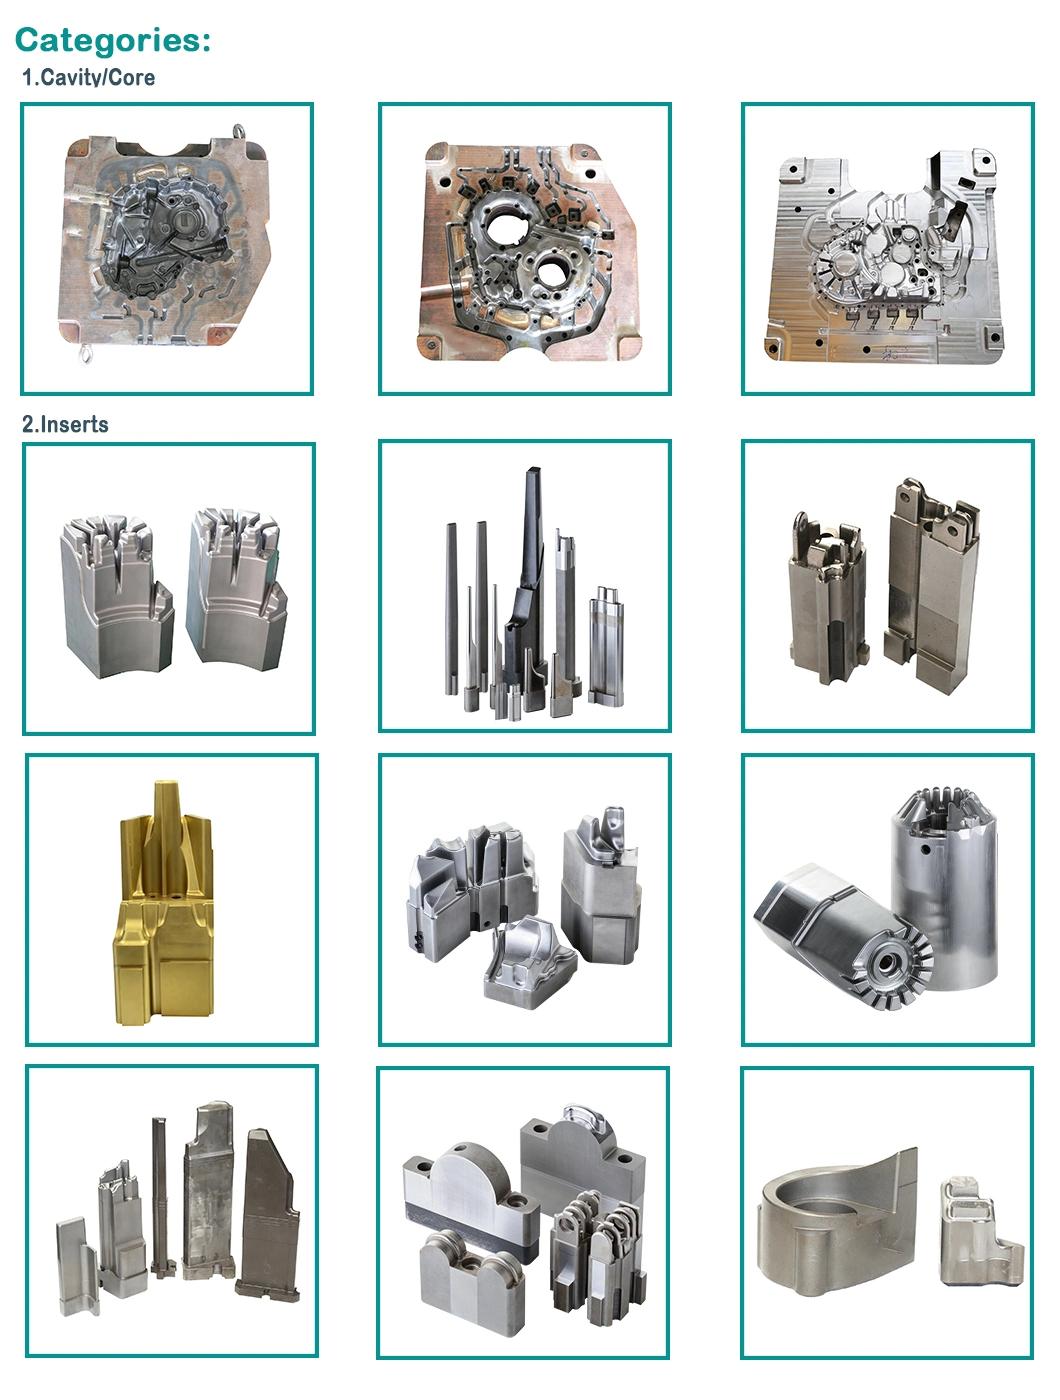 Molds Die Design and Manufacture Services Mold Maker Molds Spare Parts Mold Components